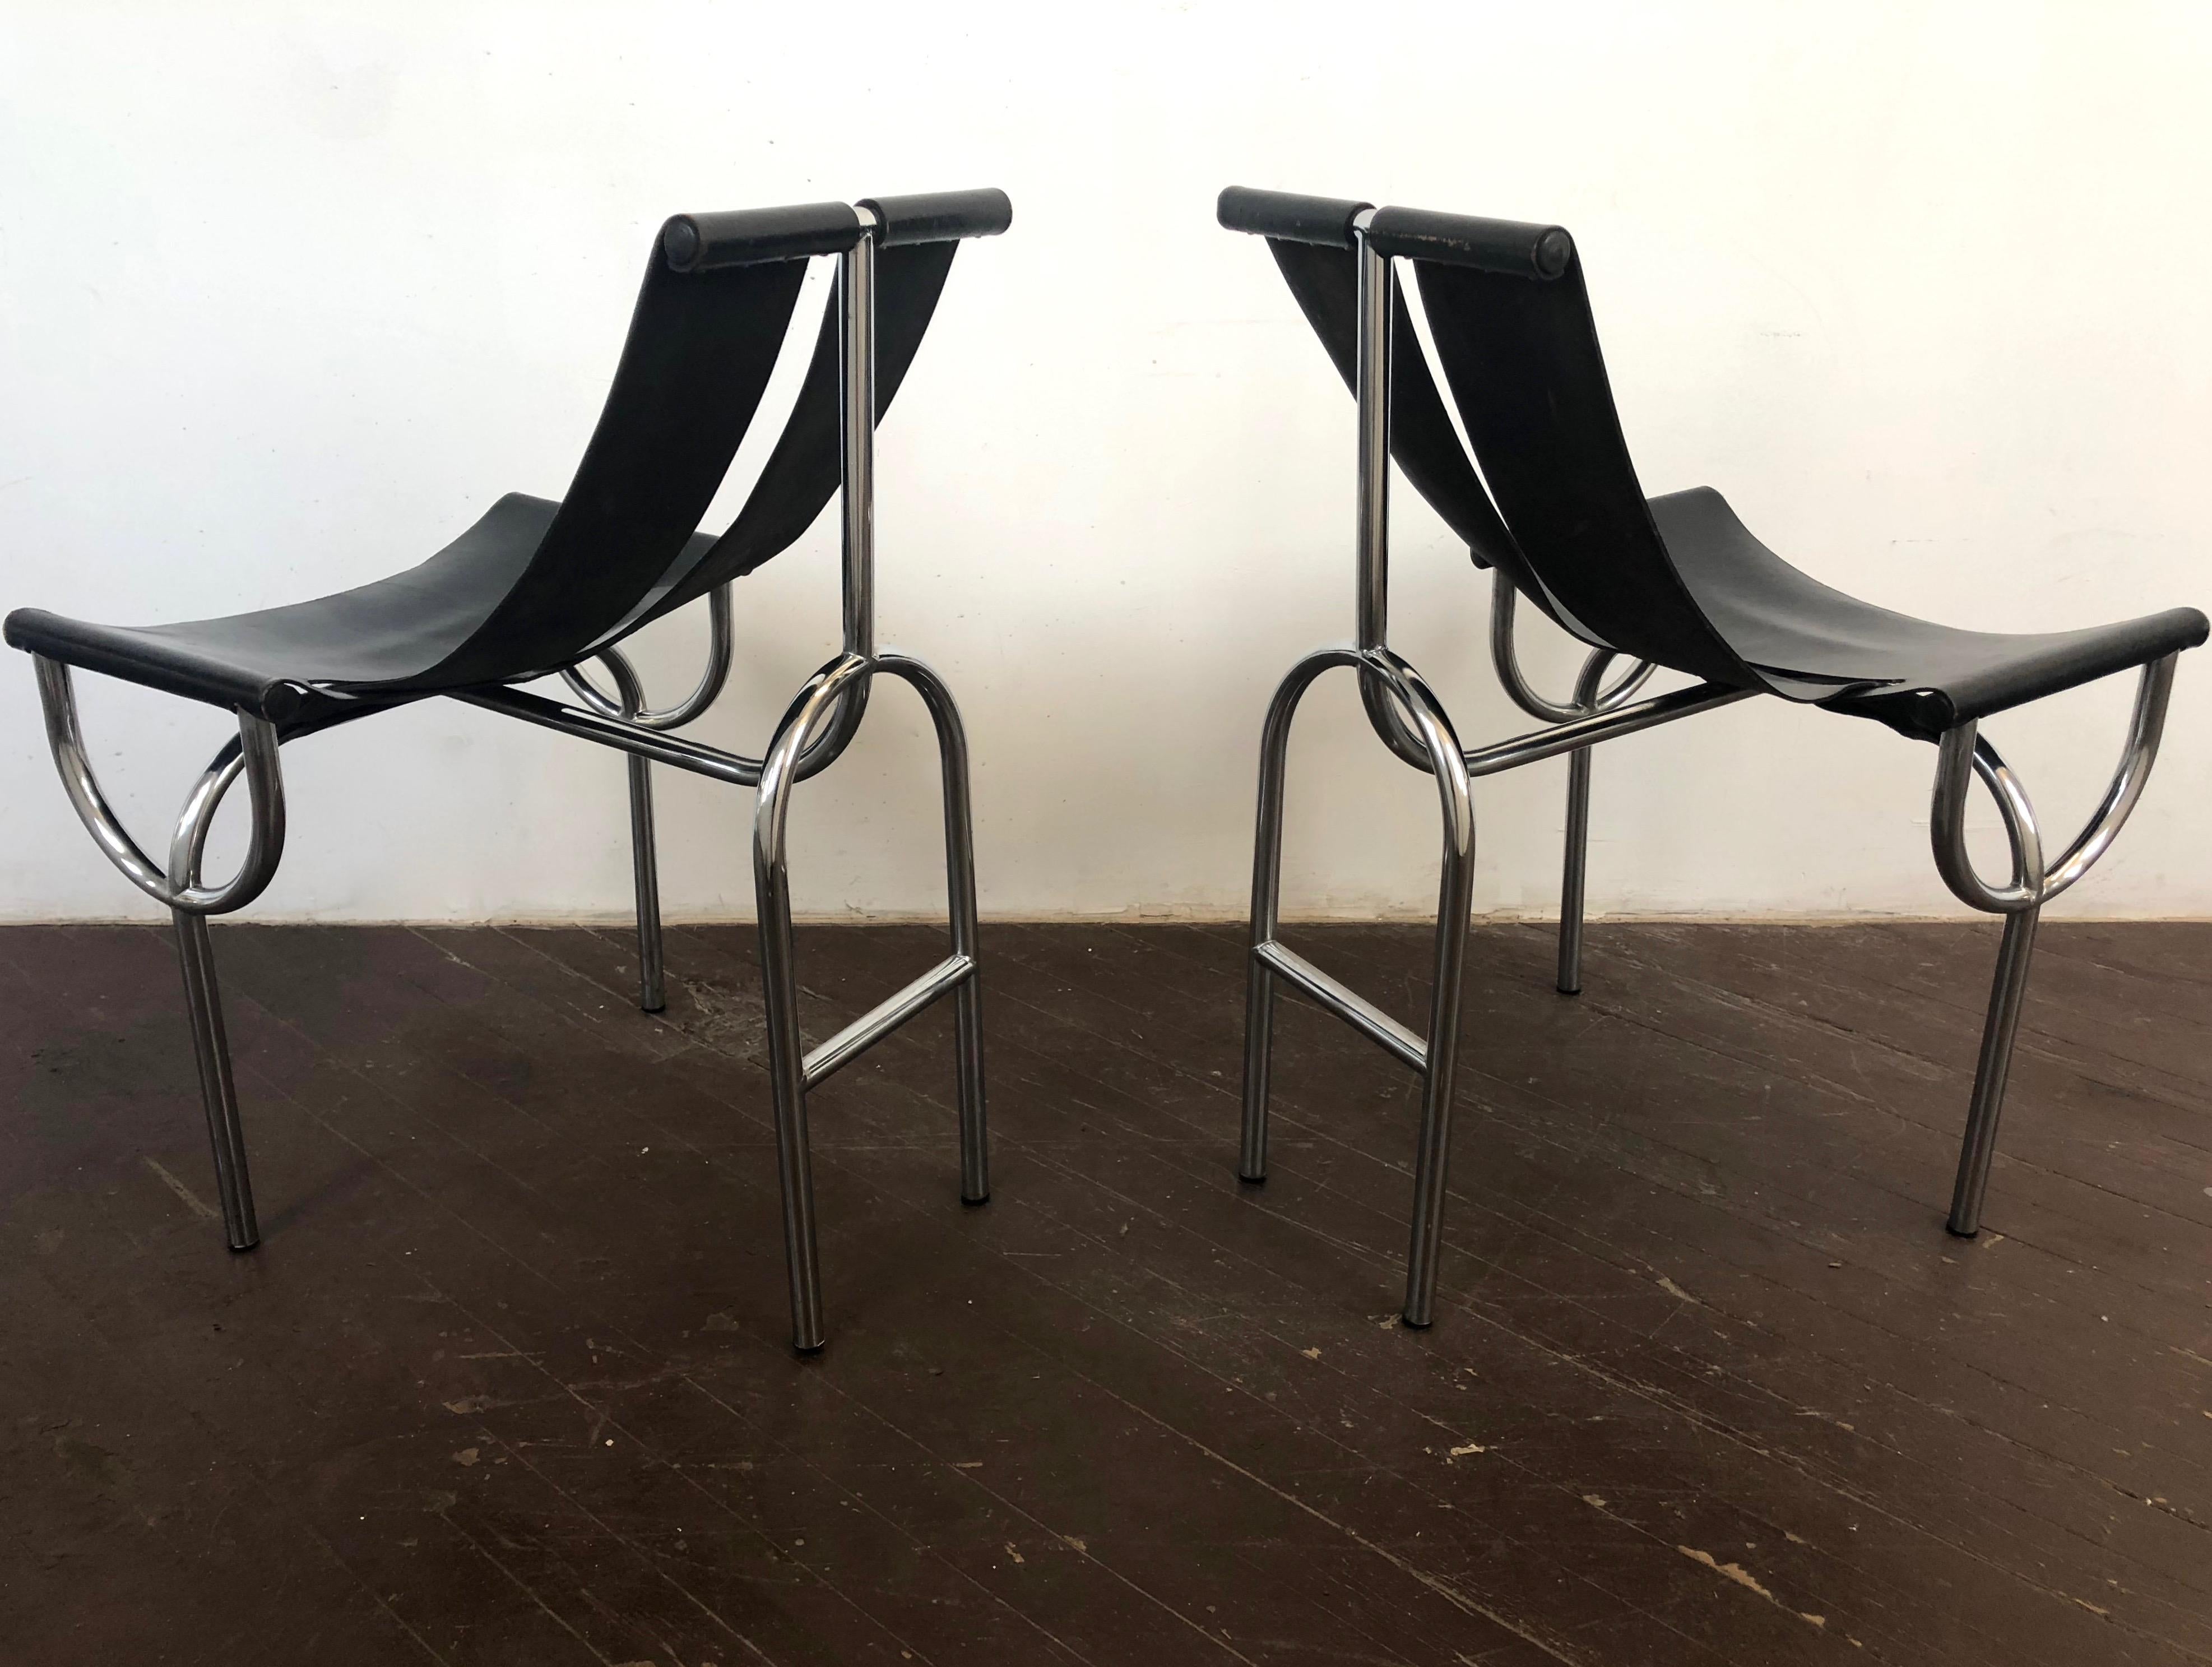 Pair of TRI 15 Chairs by Roberto Gabetti & AImaro Isola for Arbo, Italy, 1968 For Sale 1